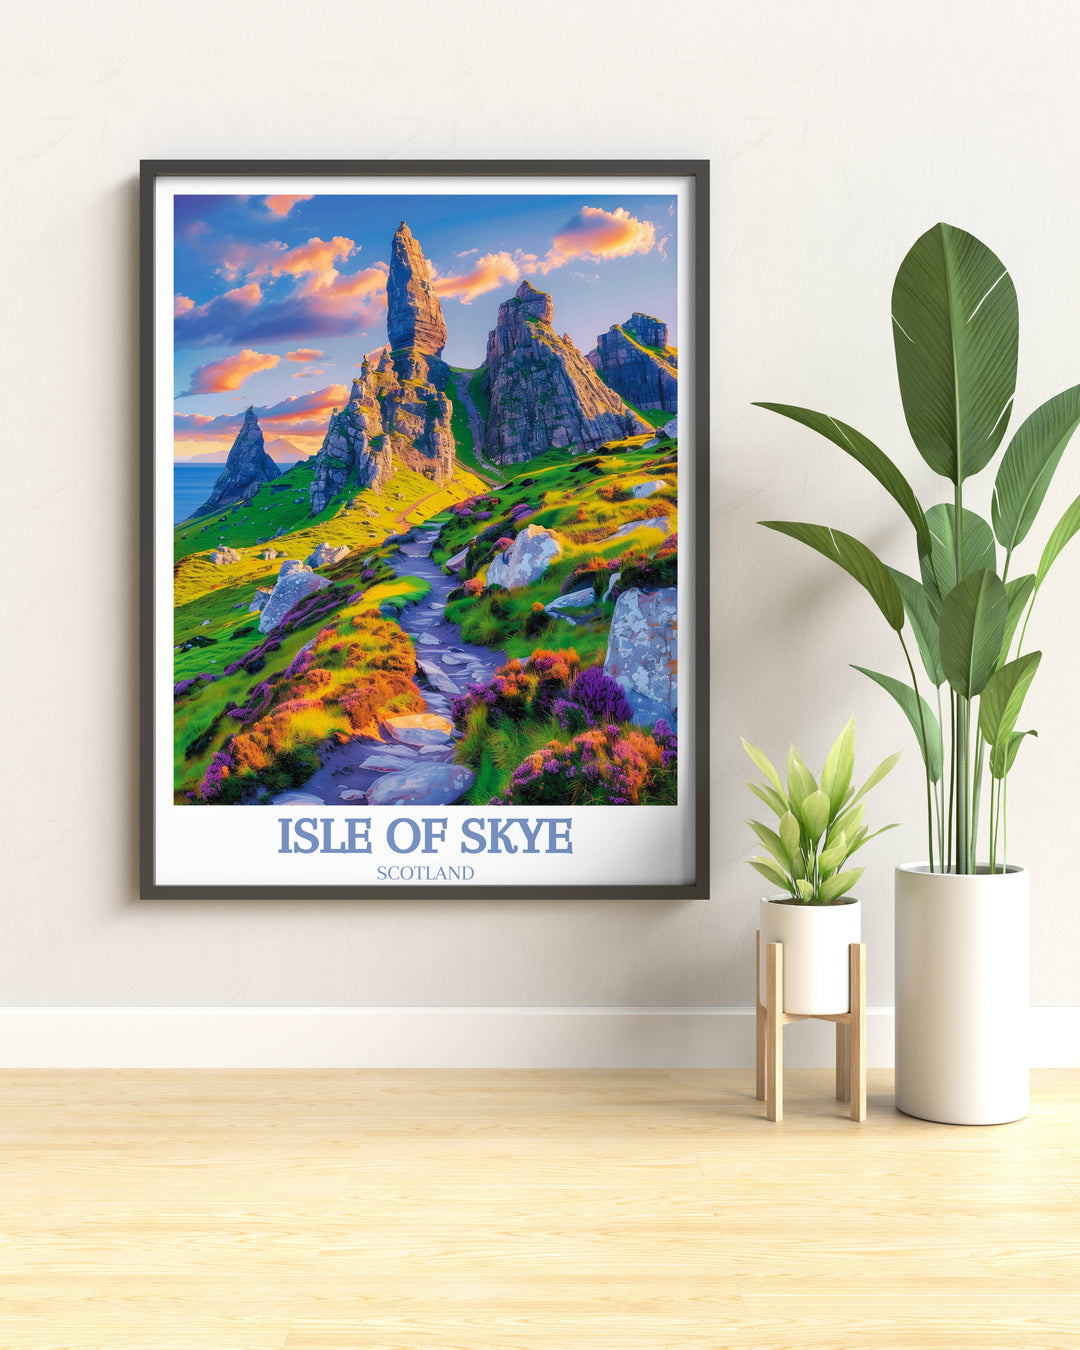 A detailed Isle of Skye art print of Scottish wildlife and rugged terrain, bringing the essence of Scotlands natural beauty into your living environment.